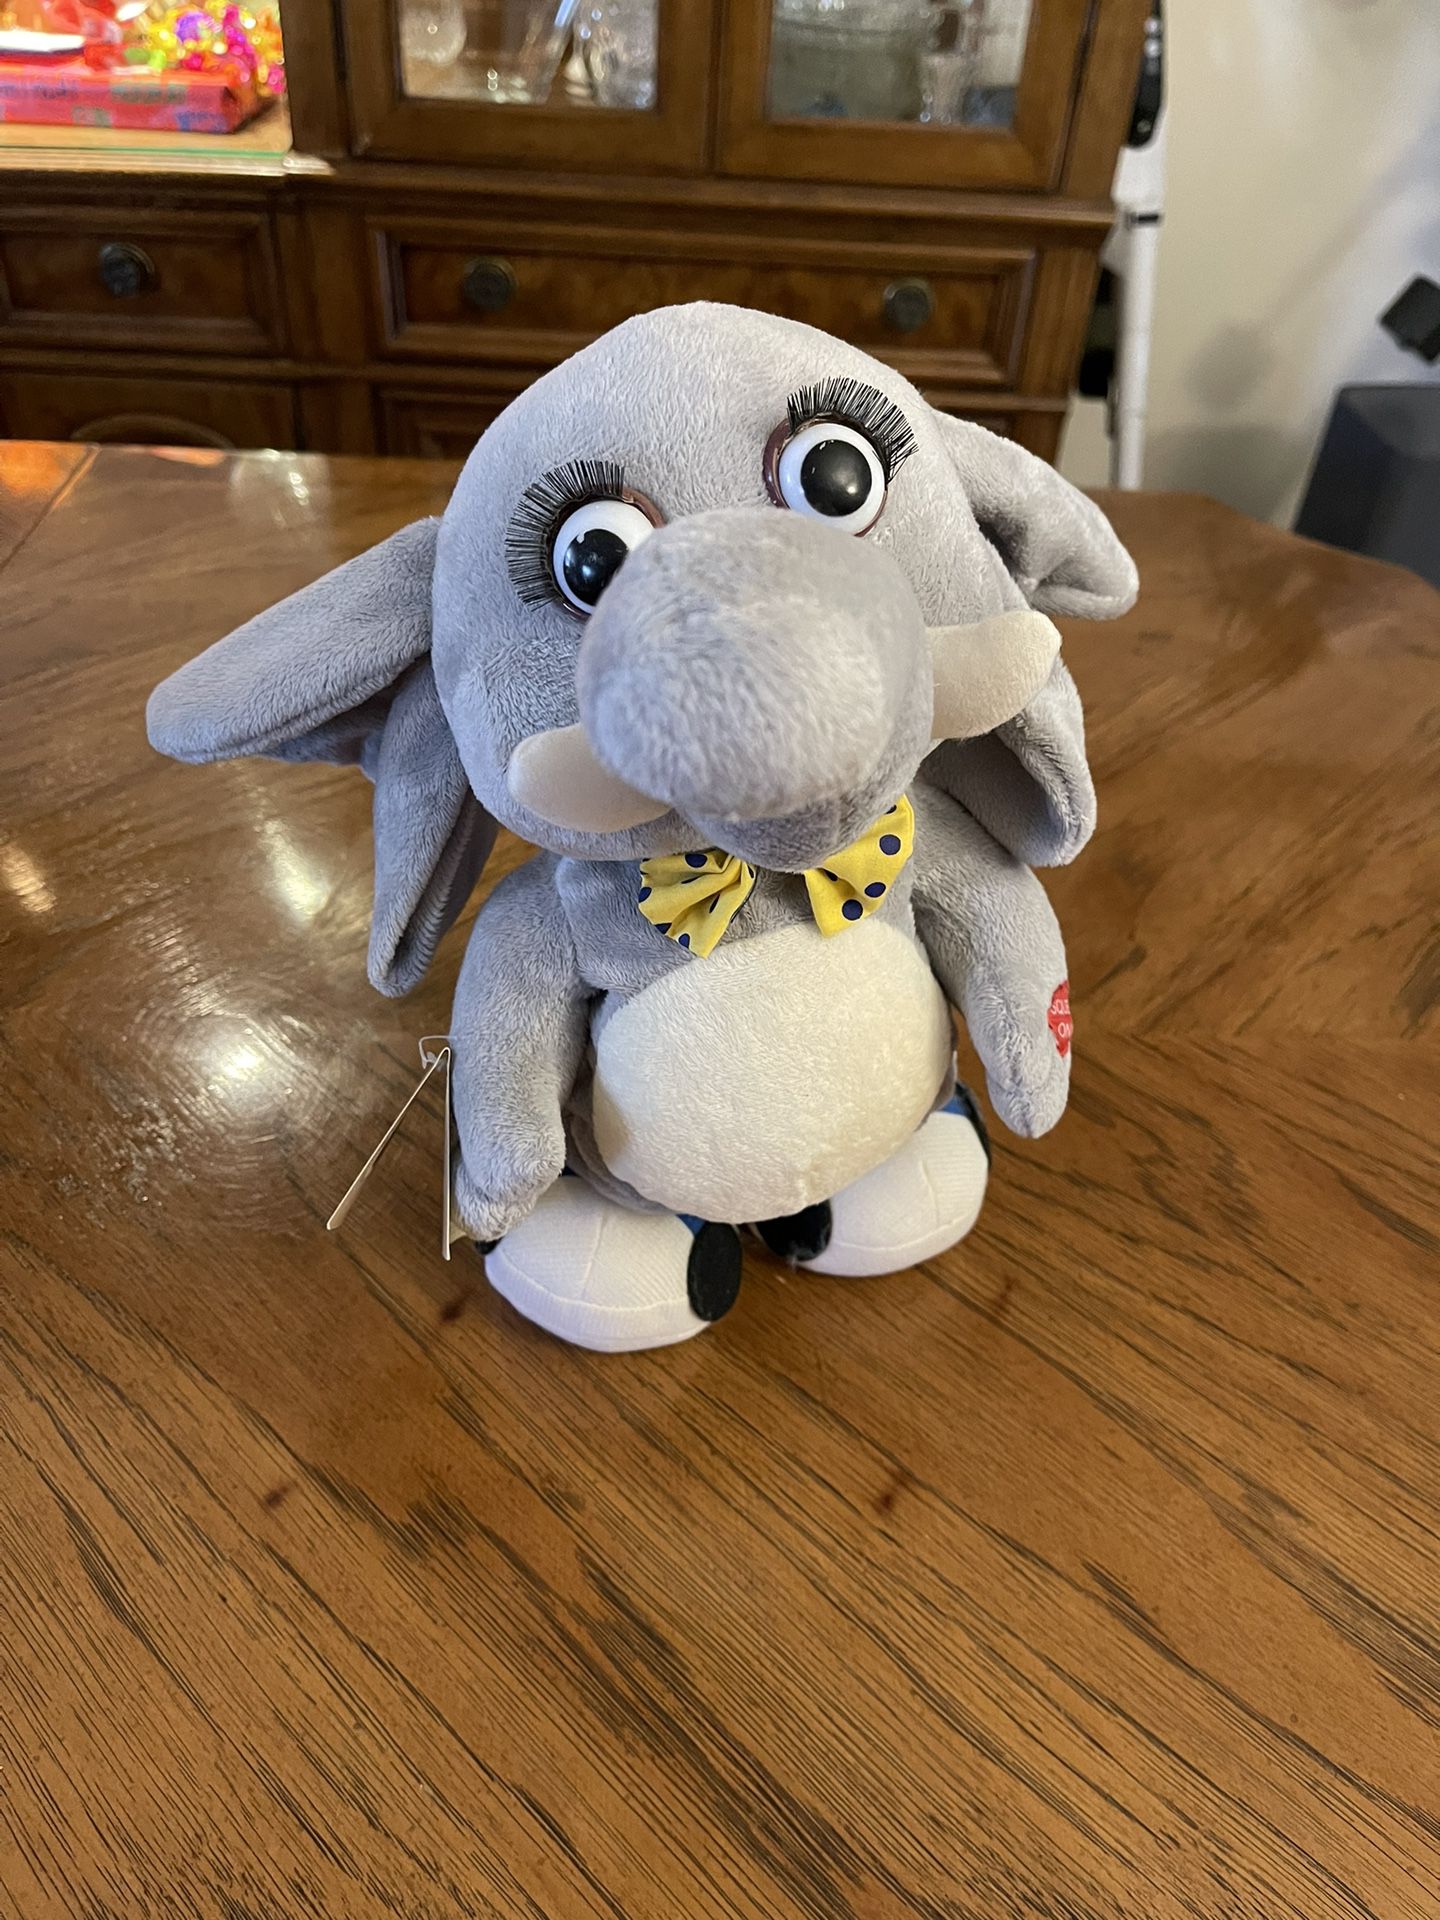 Super Cute Singing Roller Skating Musical Elephant - Chantilly Lane Musicals - Excellent Condition